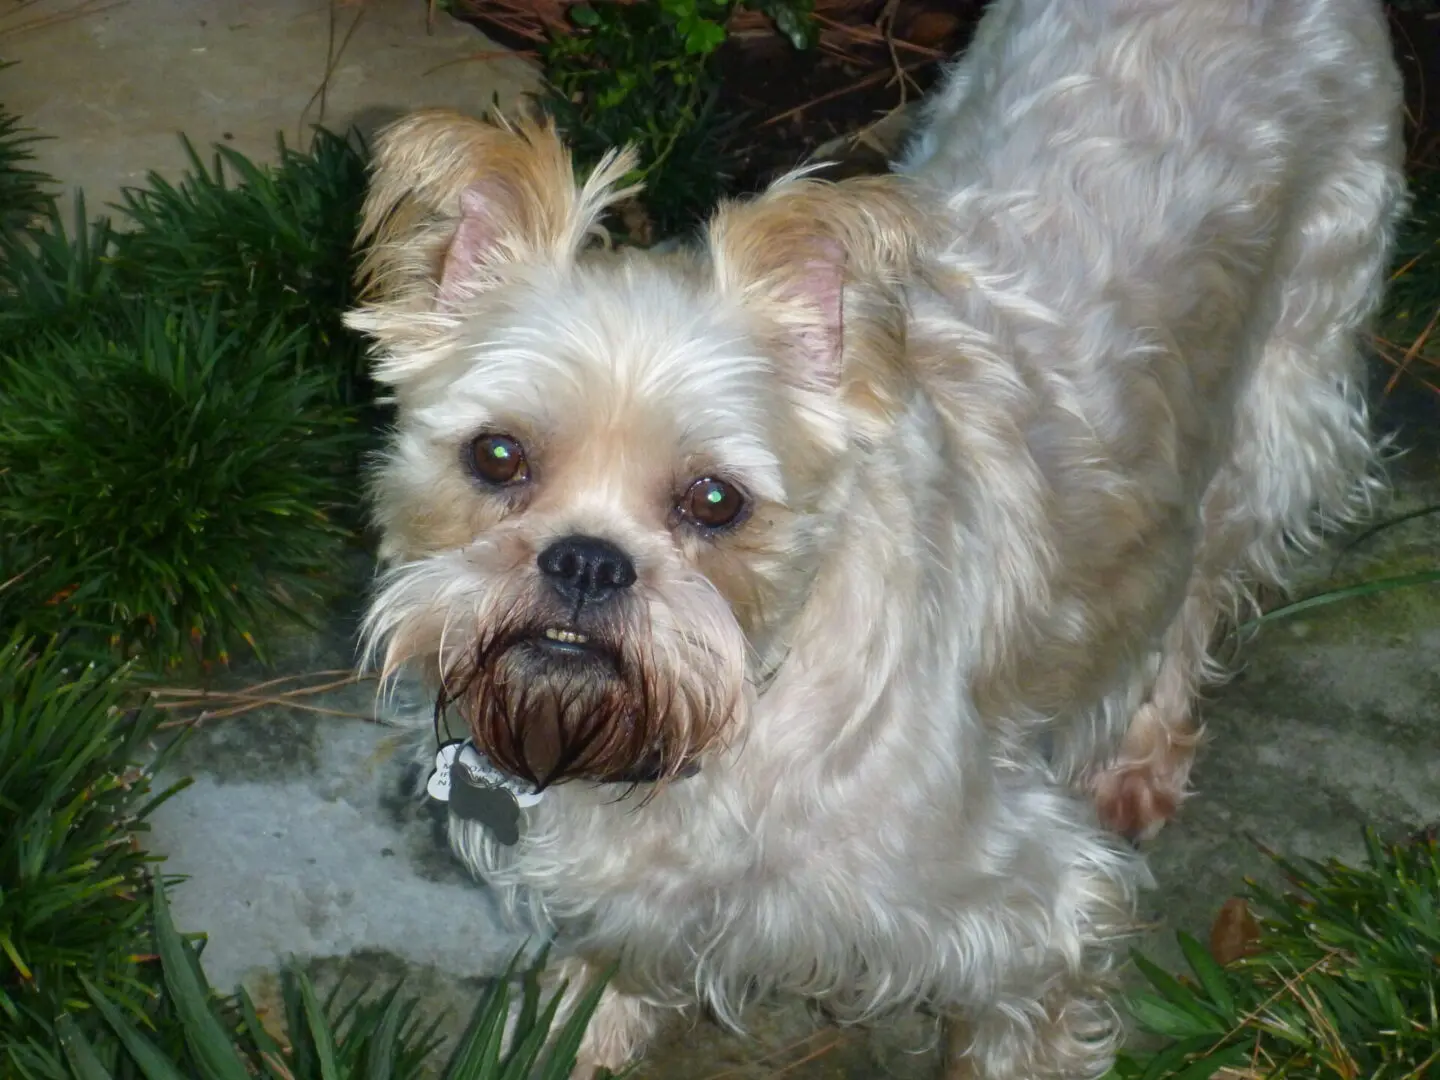 A white Brussels Griffon